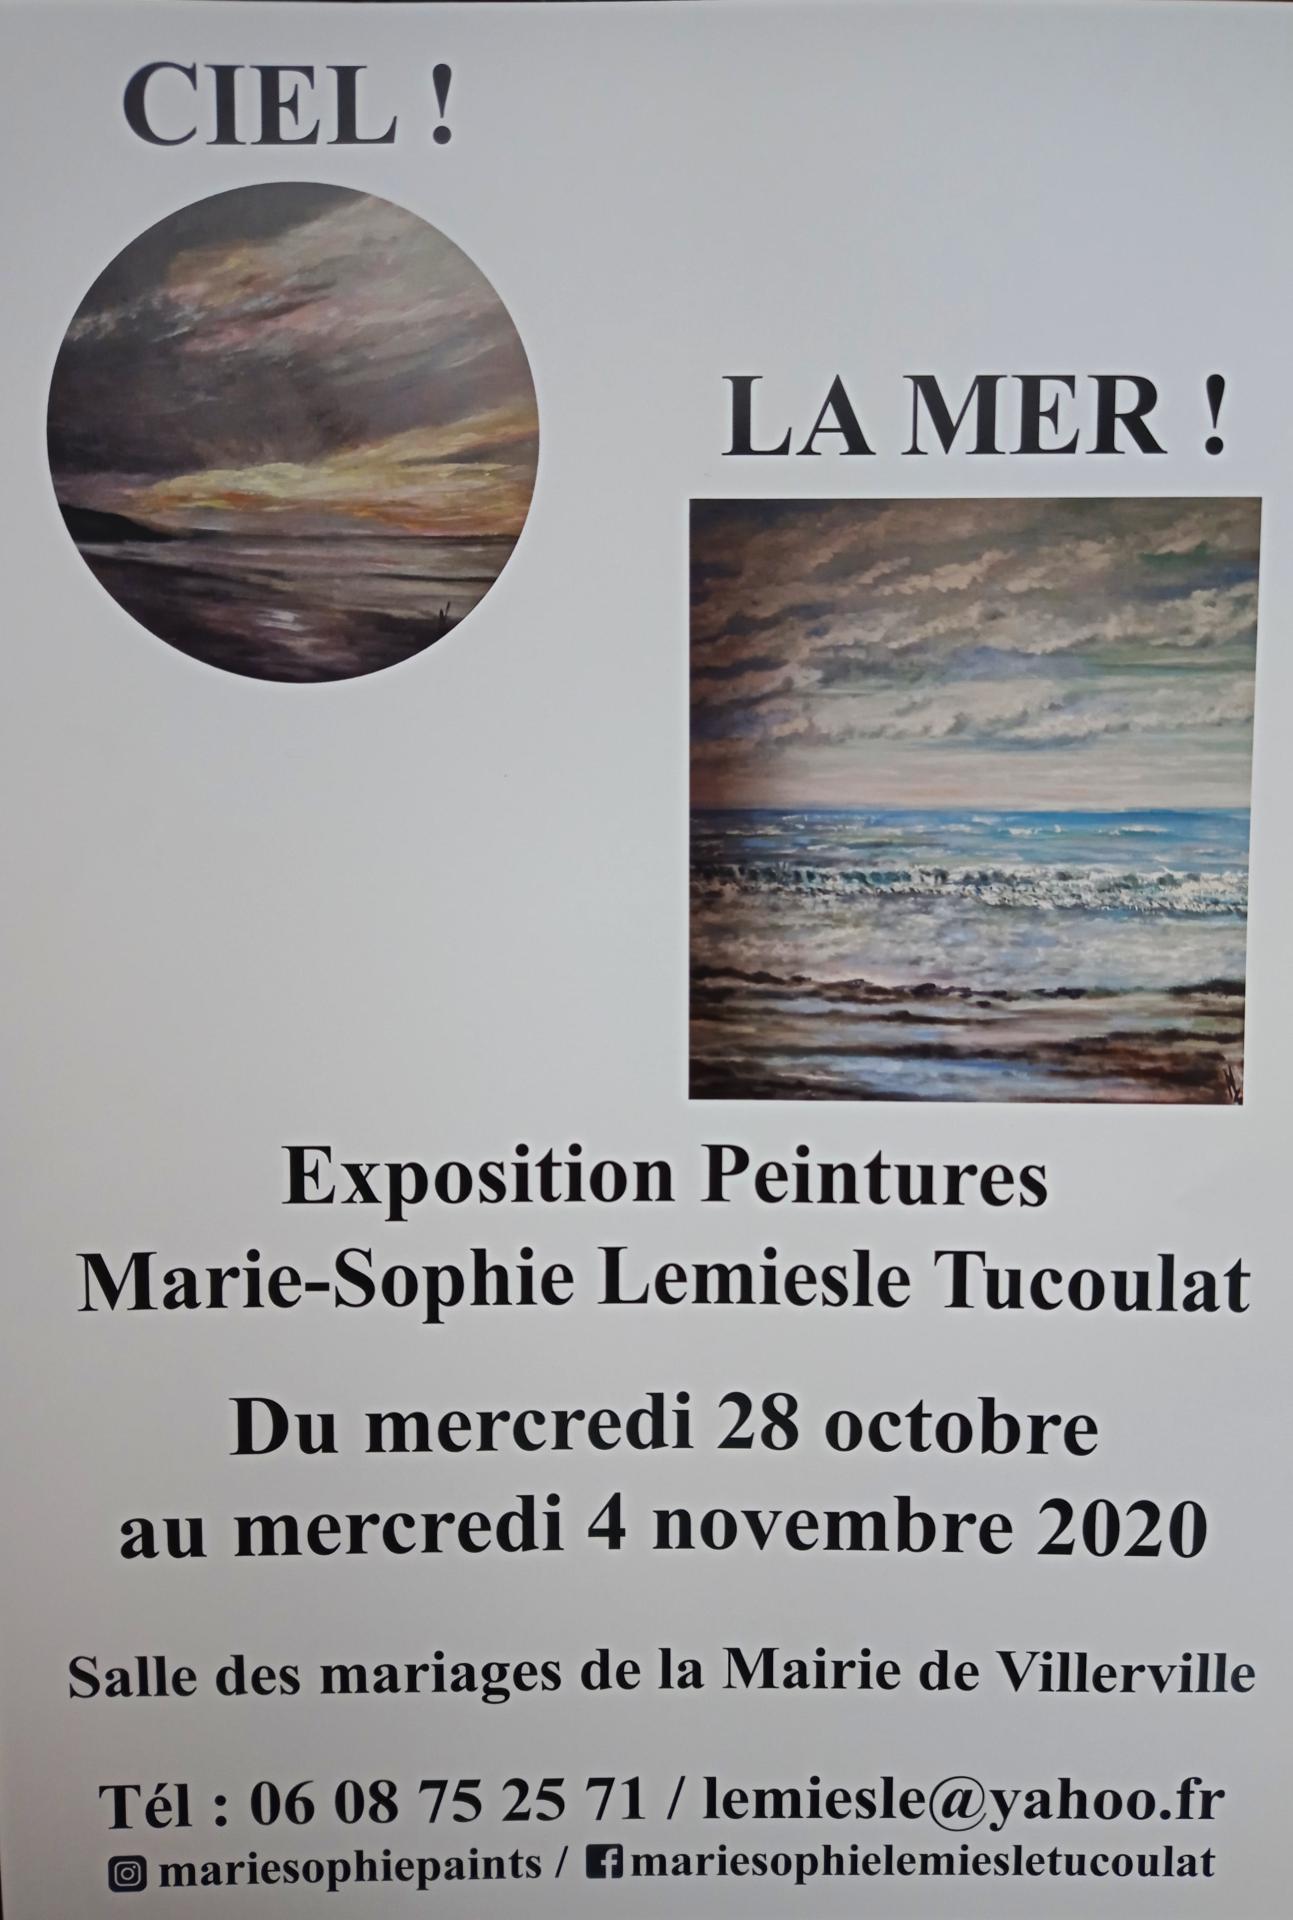 Expo mme tucoulat 1